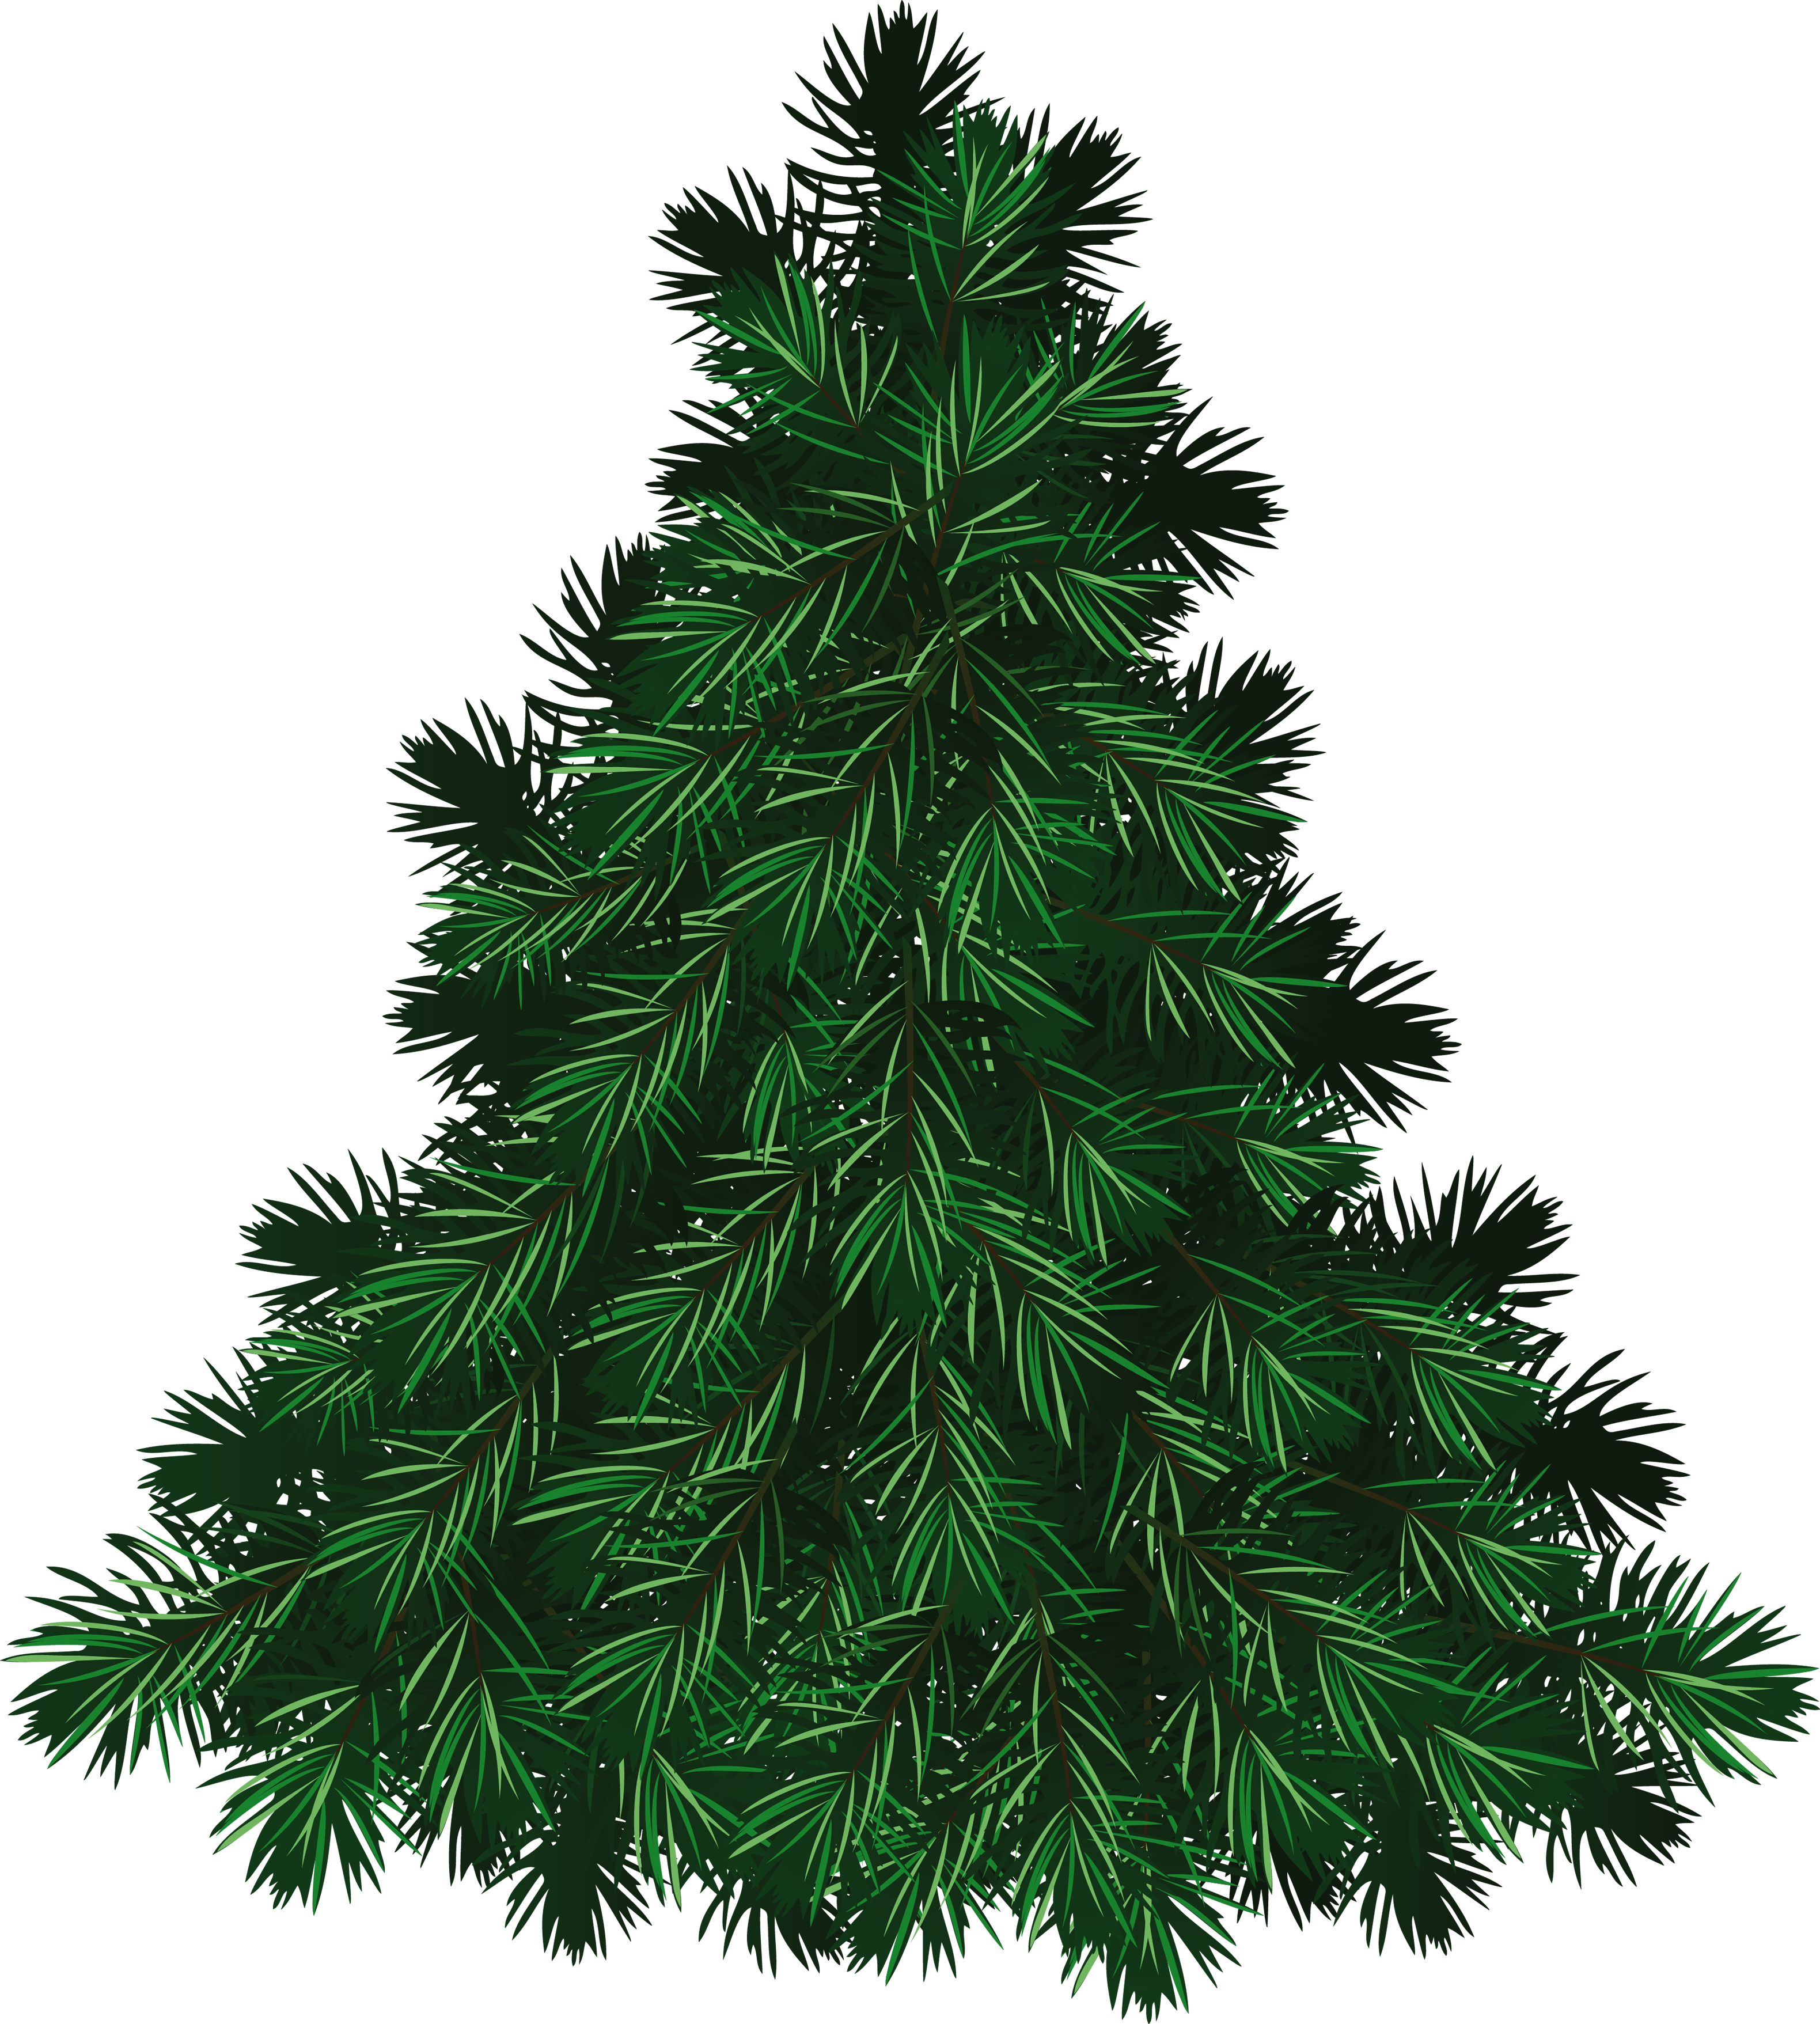 Fir Tree PNG Image - PurePNG | Free transparent CC0 PNG Image Library